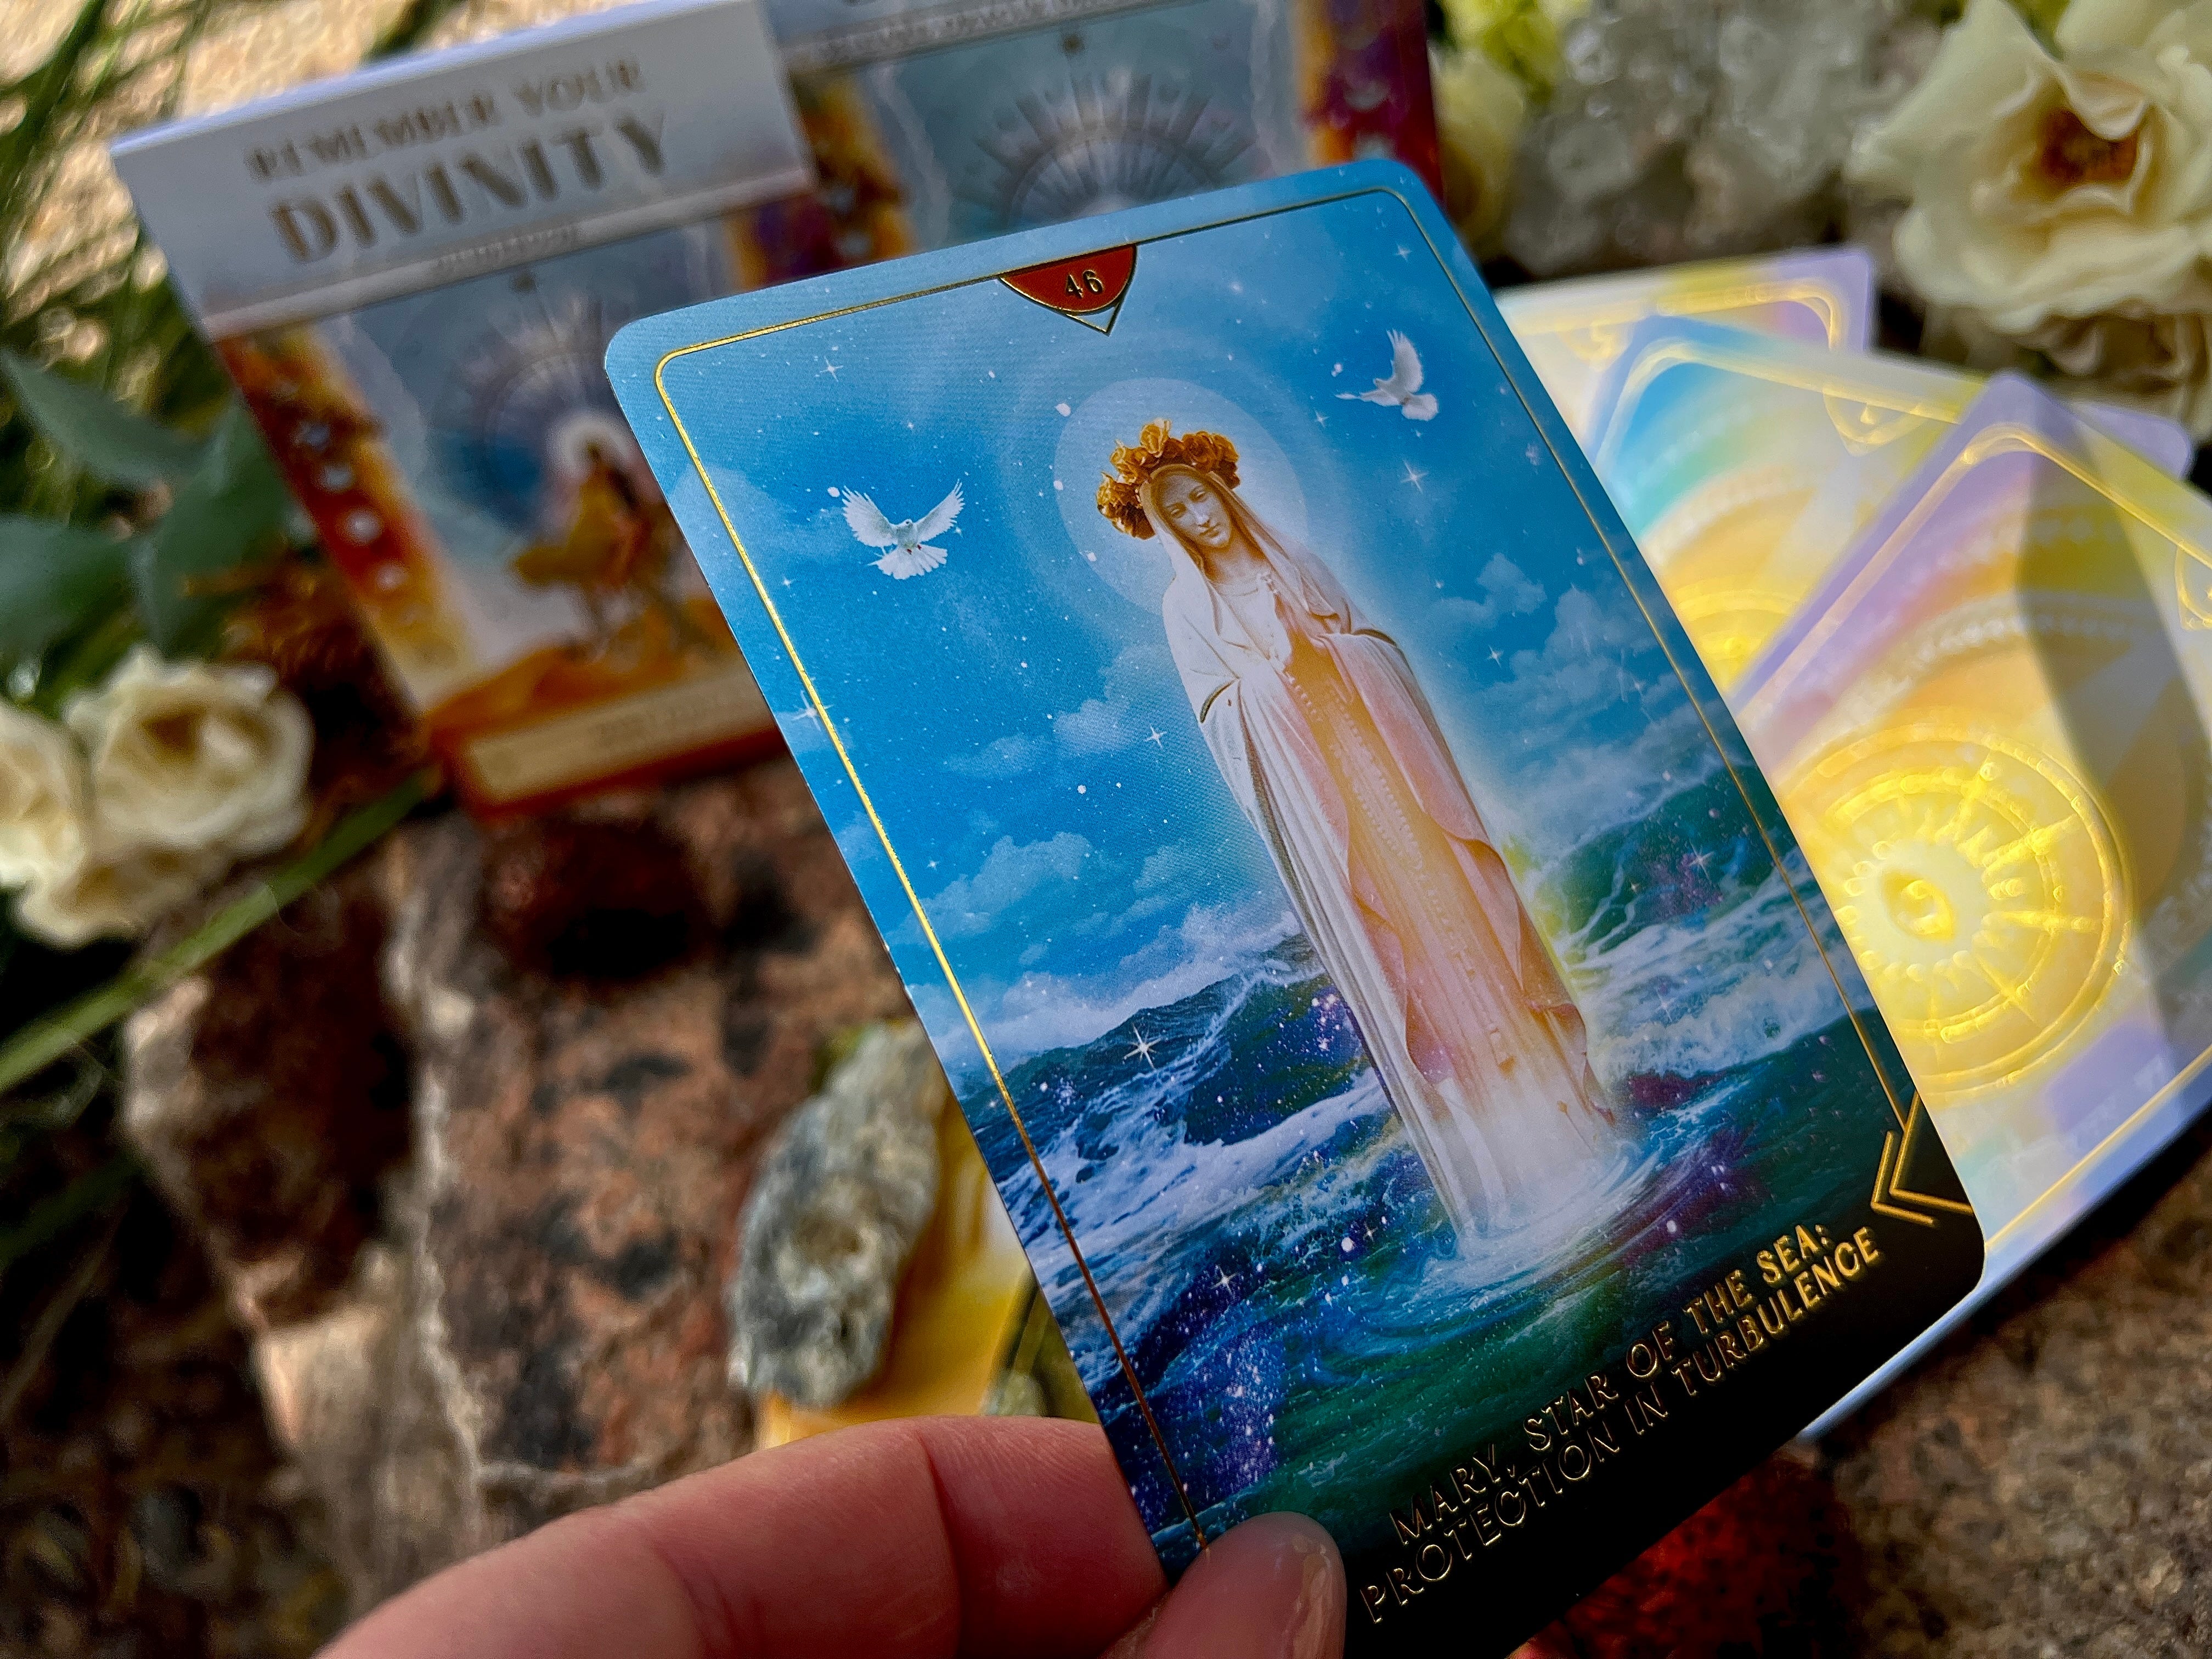 REMEMBER YOUR DIVINITY // 55 CARD DECK + GUIDEBOOK